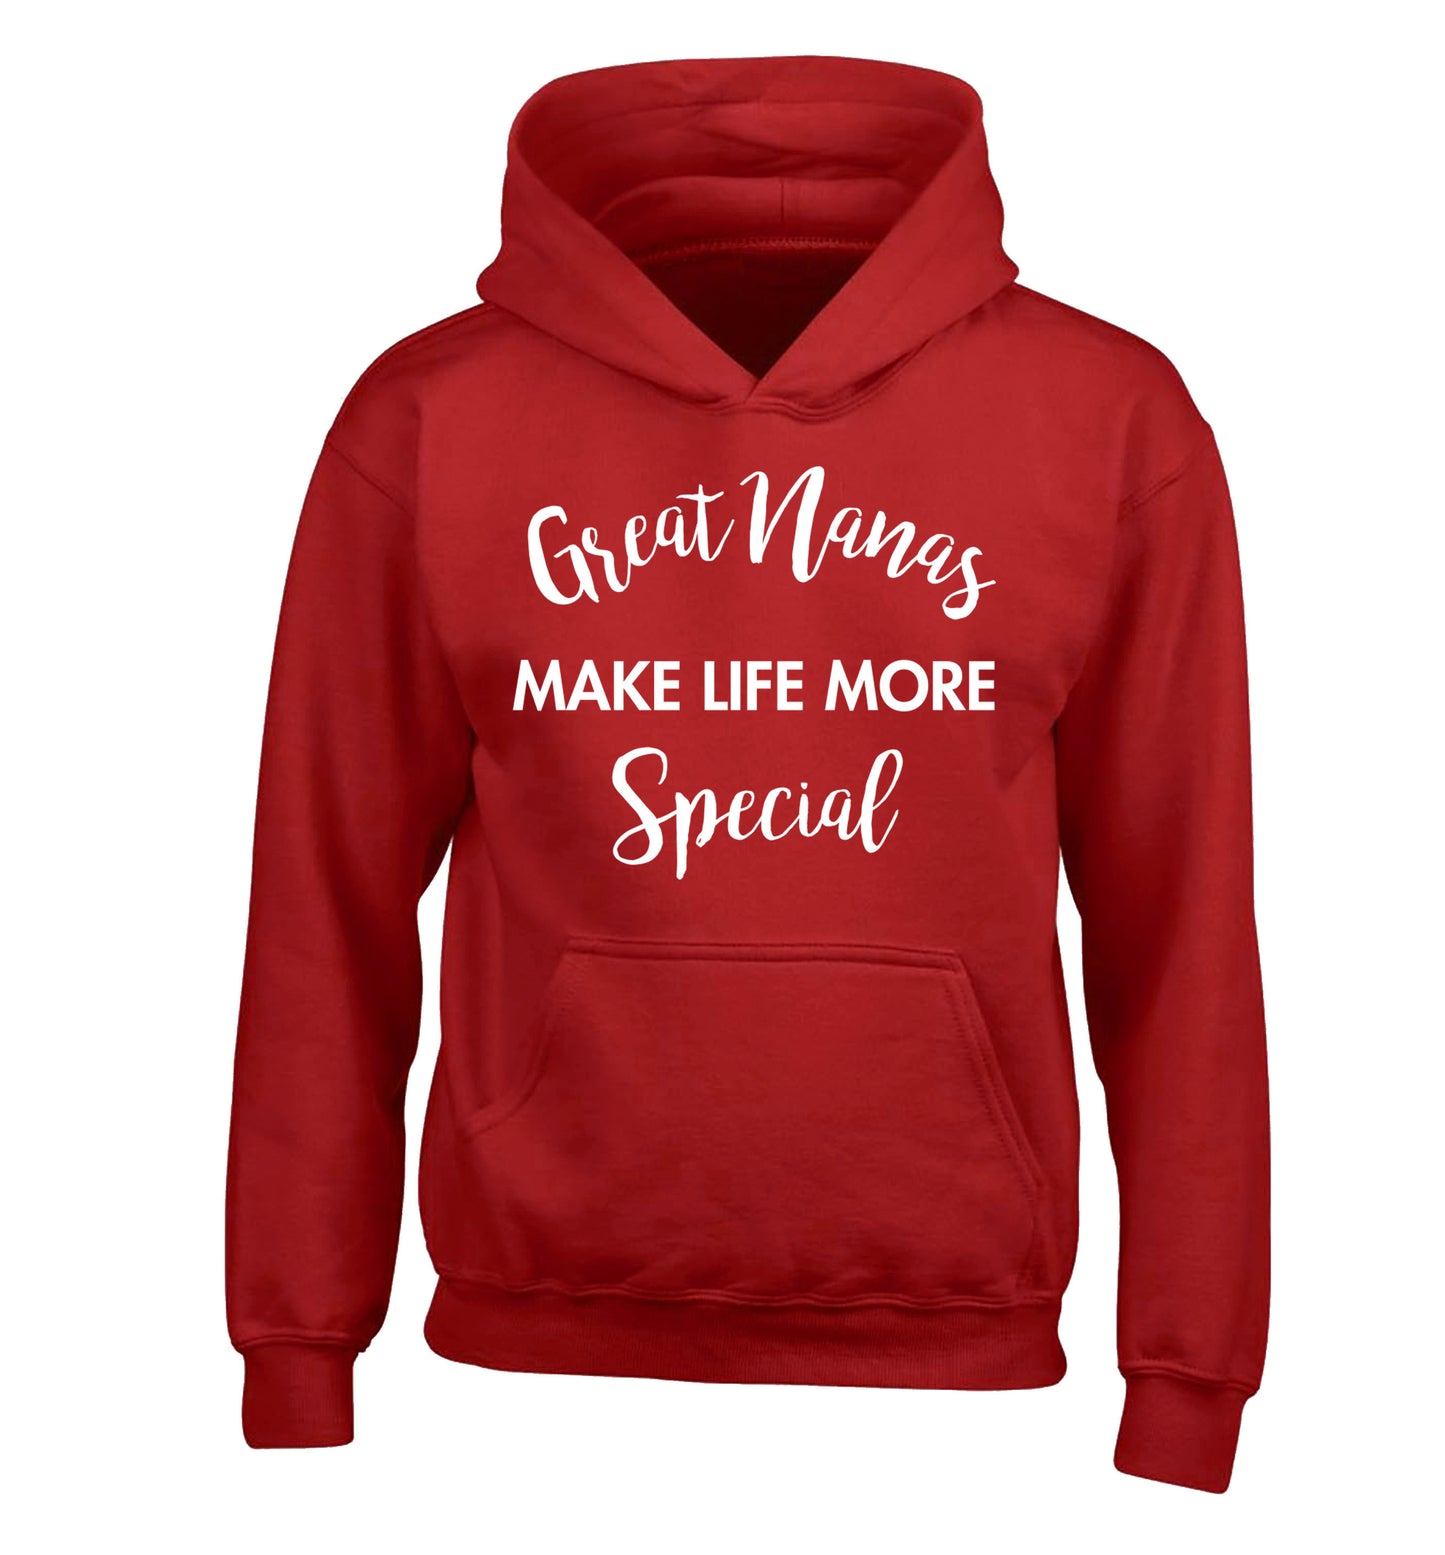 Great nanas make life more special children's red hoodie 12-14 Years